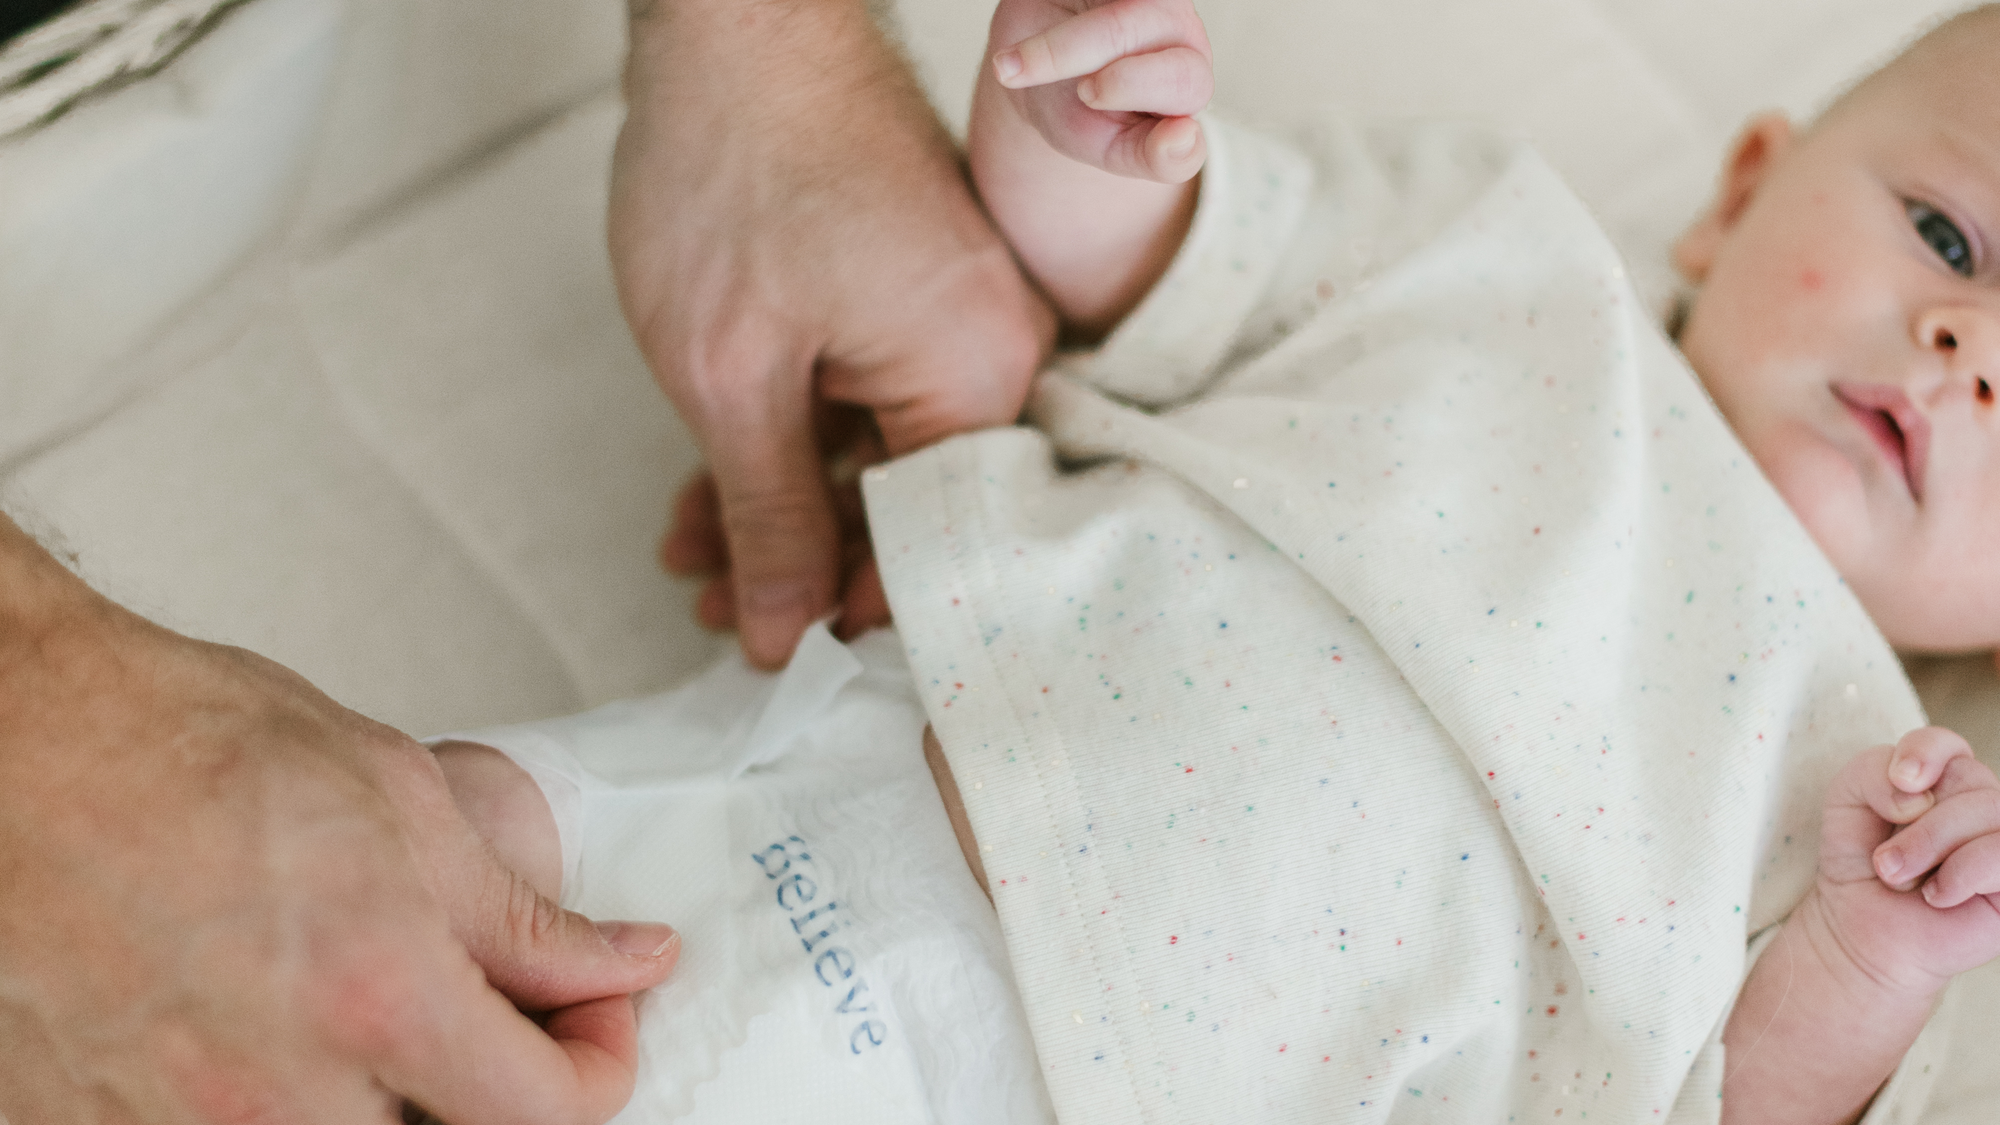 Newborn Diapers: Keep Your Mind at Ease with Believe Baby Diapers